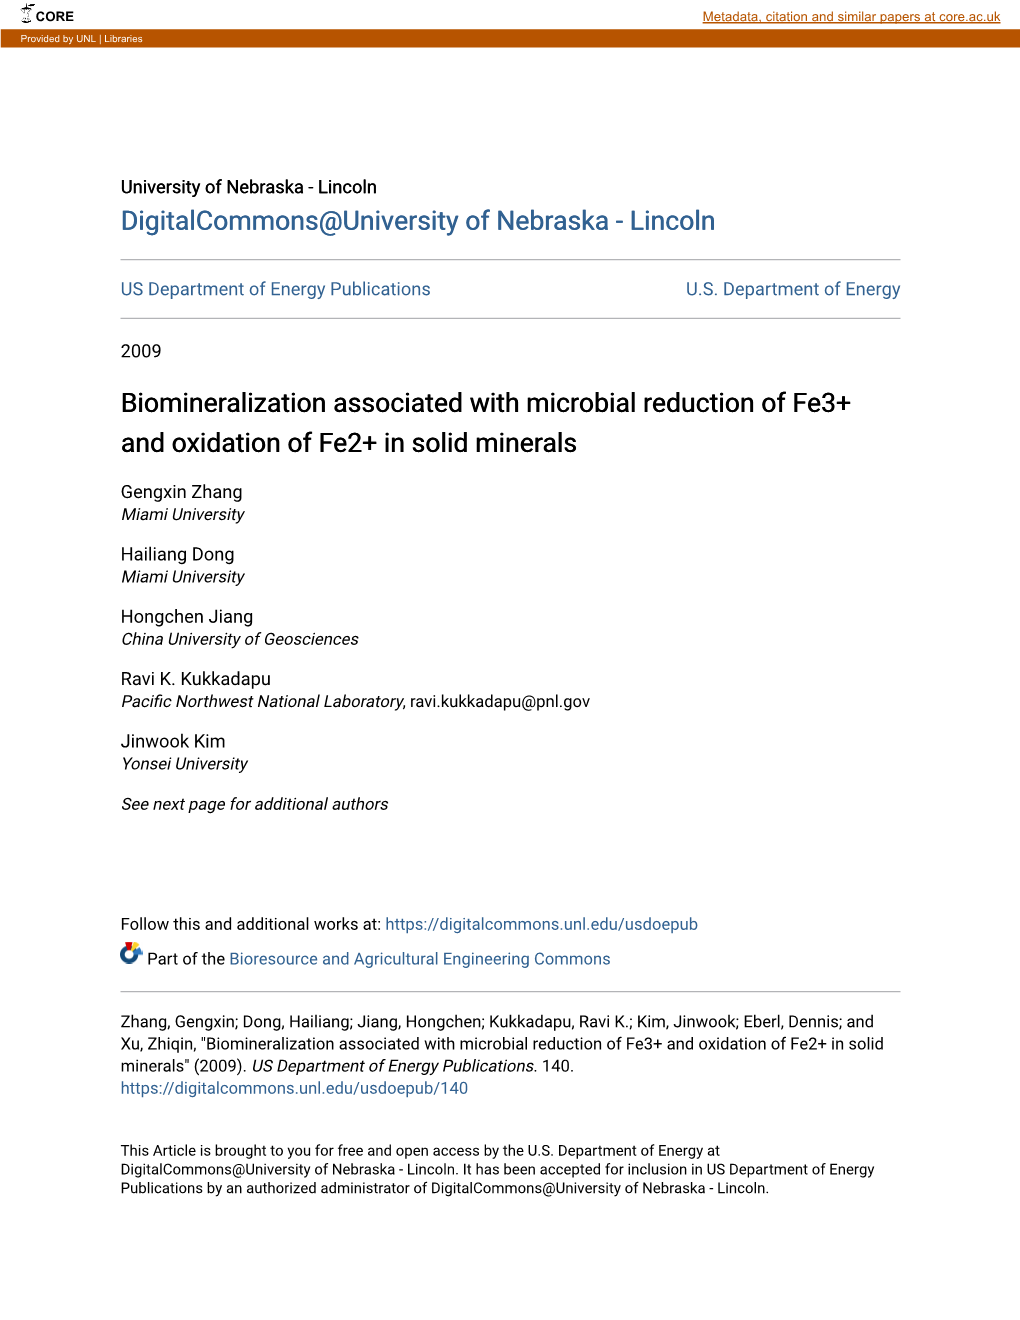 Biomineralization Associated with Microbial Reduction of Fe3+ and Oxidation of Fe2+ in Solid Minerals